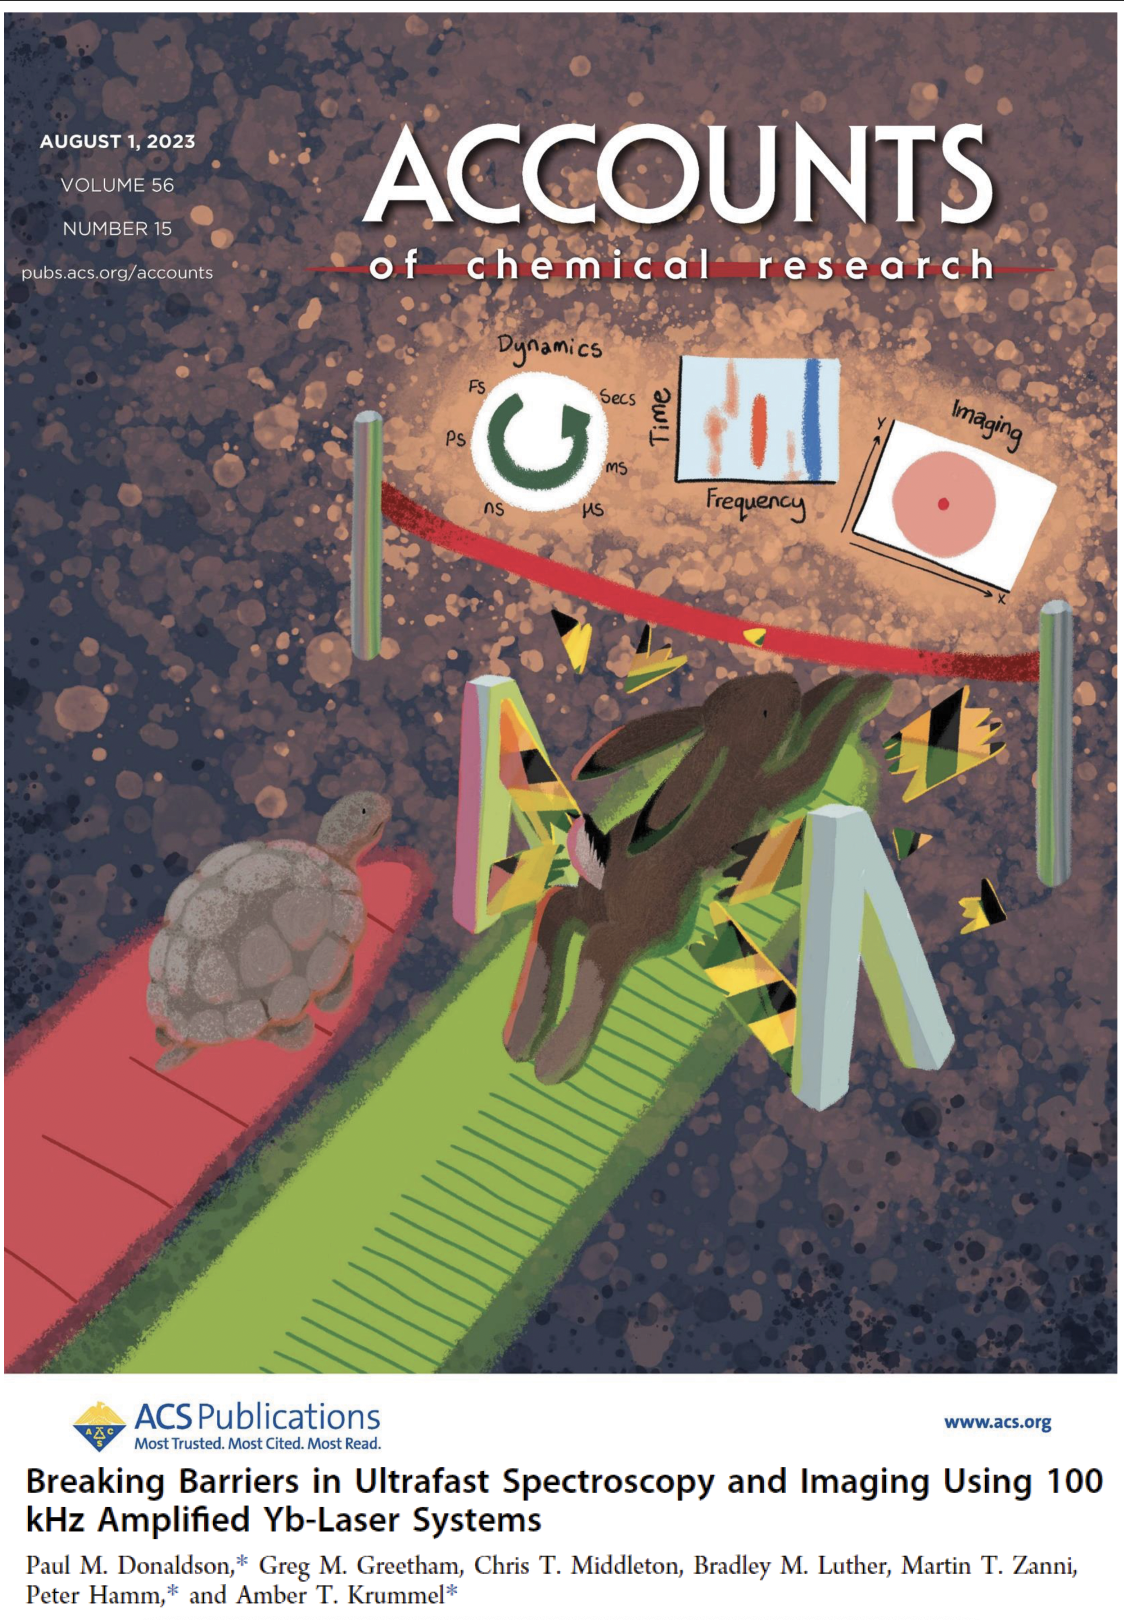 Front cover featuring a hare and a tortoise racing - the faster hare smashes through a barrier to access new techniques.